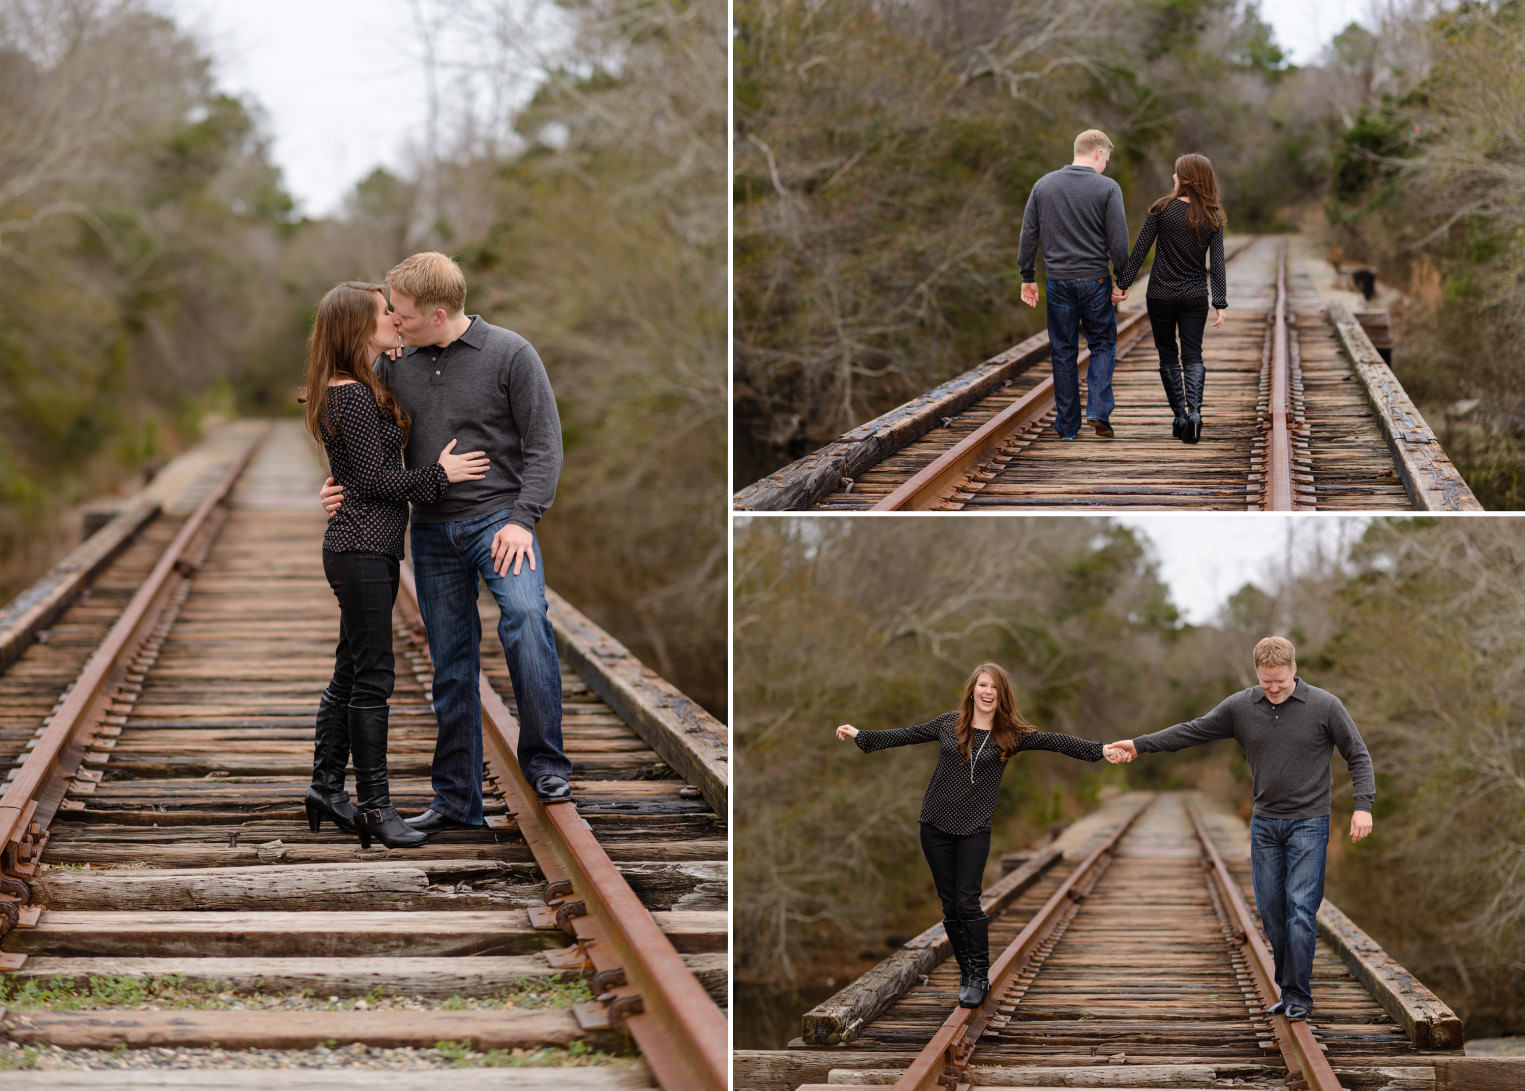 Holding hands walking down the tracks